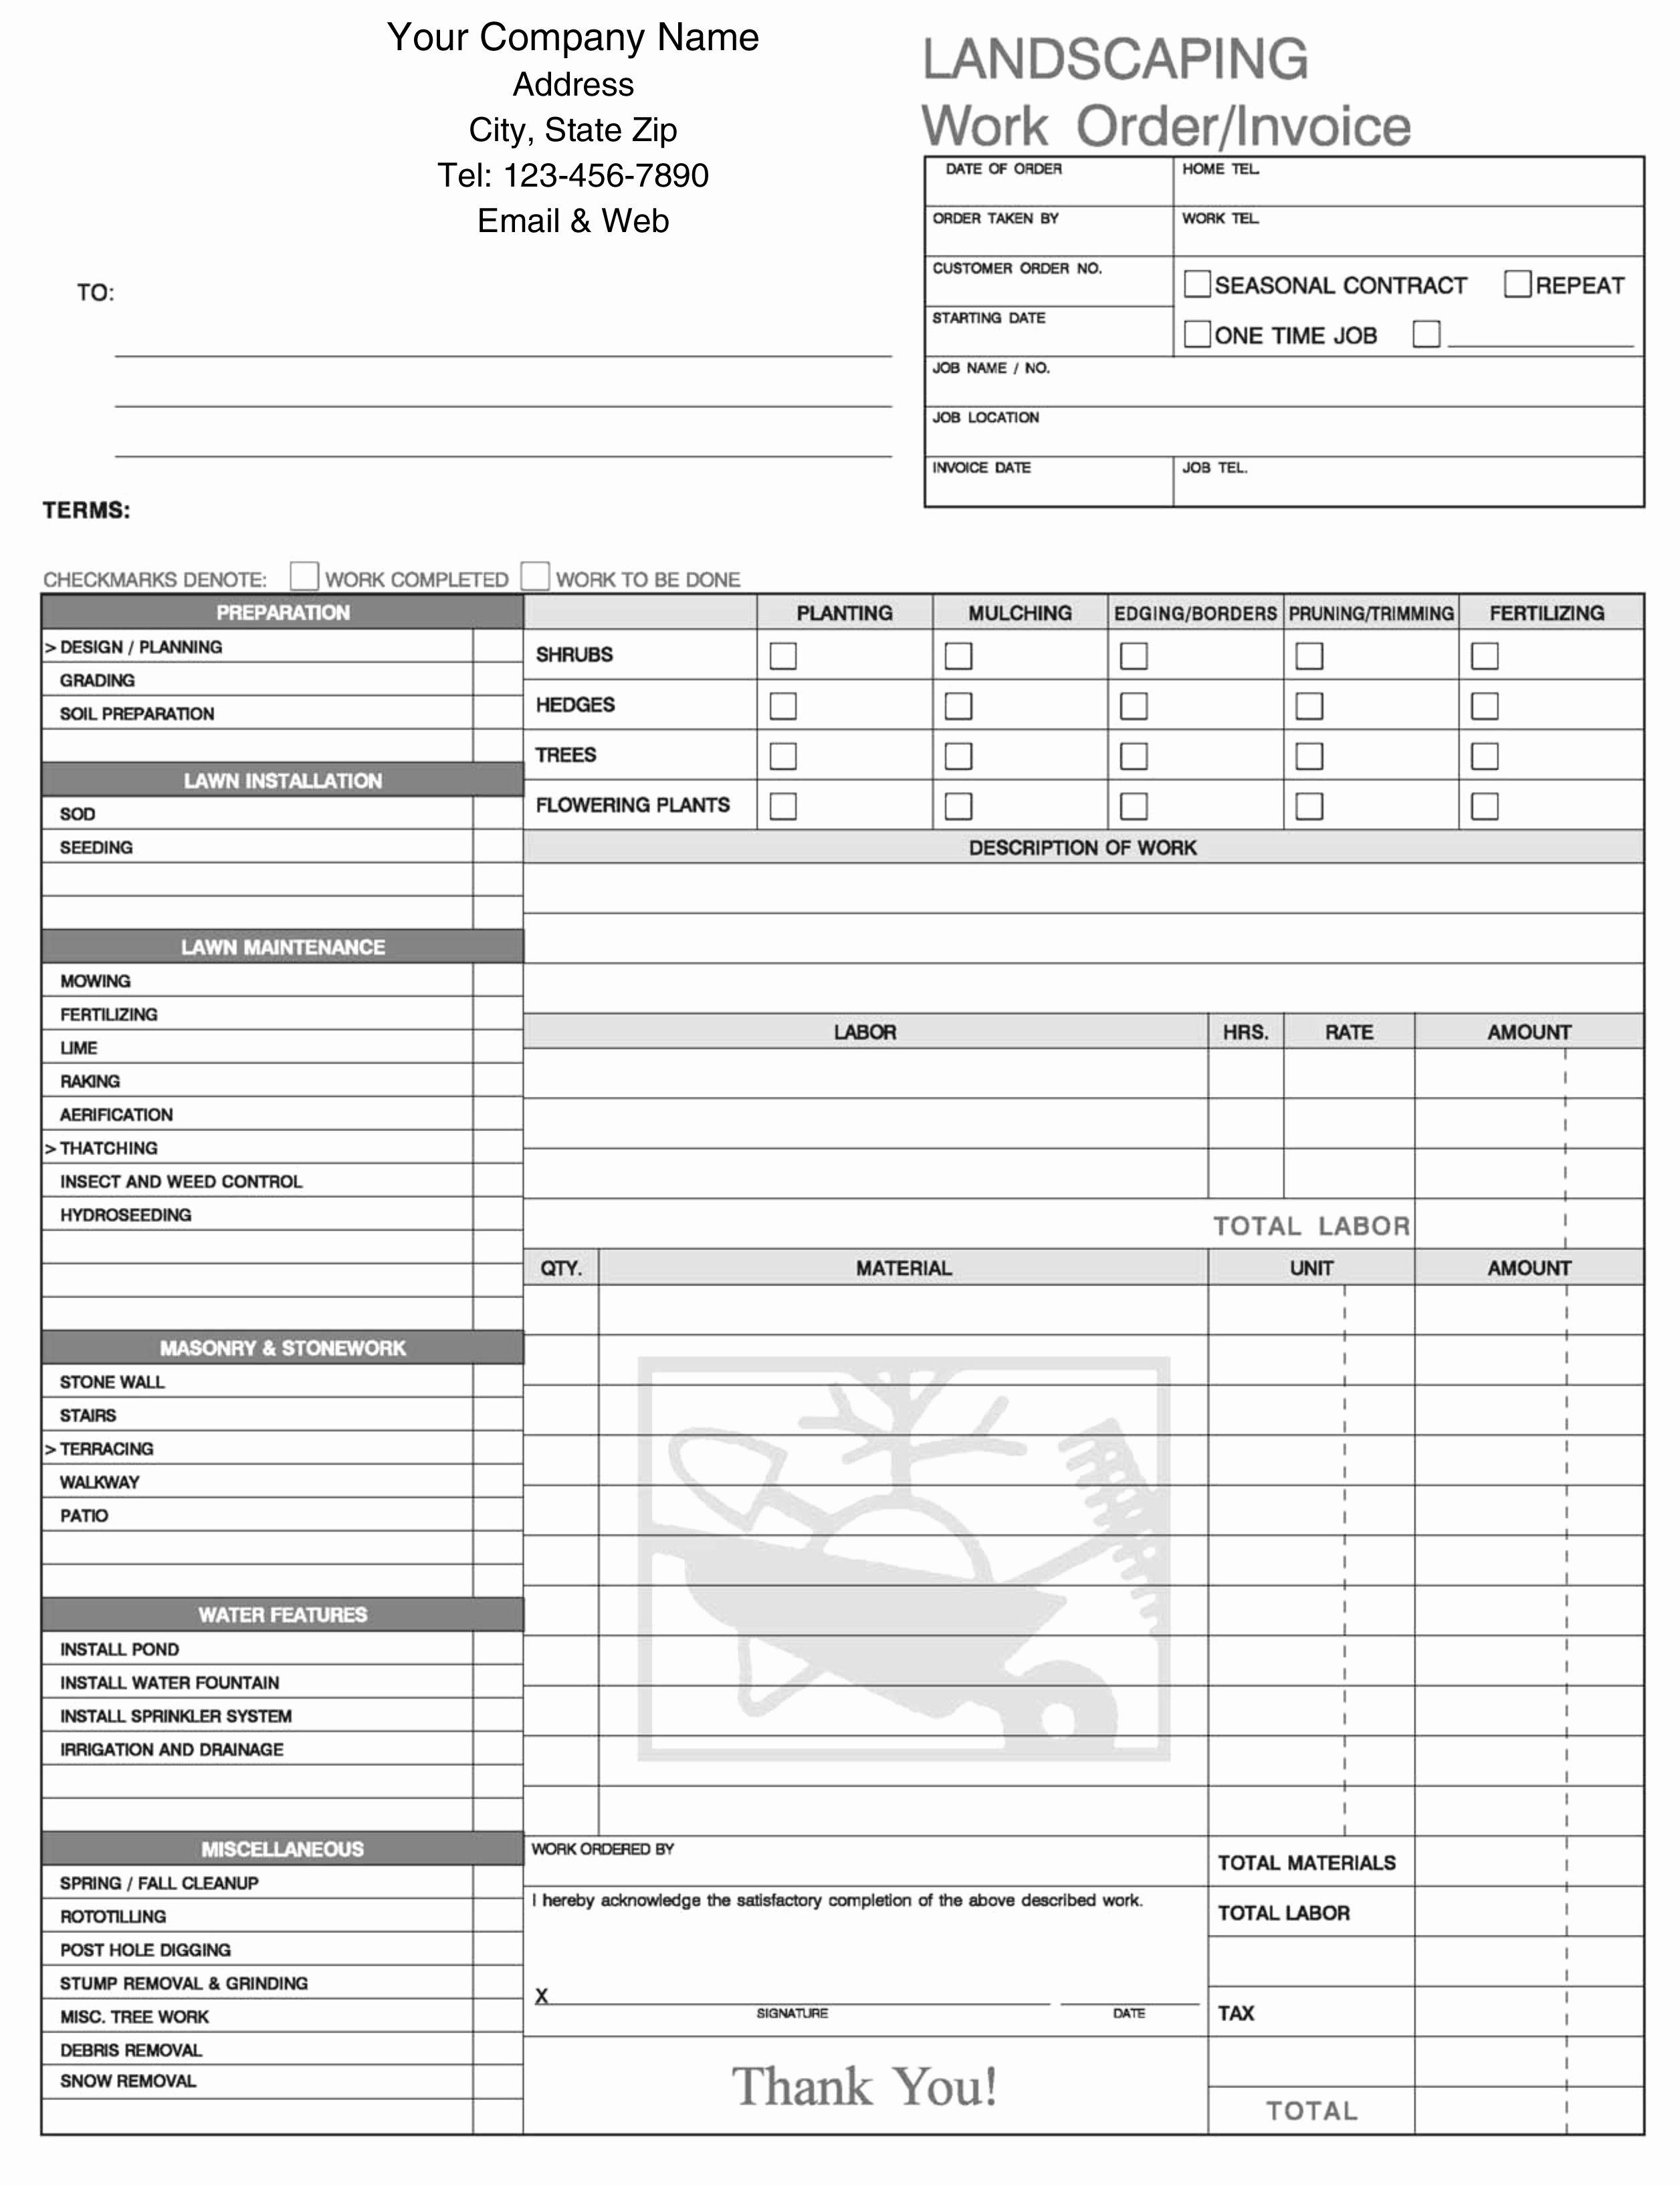 Landscaping Invoice Template Free New Landscaping Invoice Template